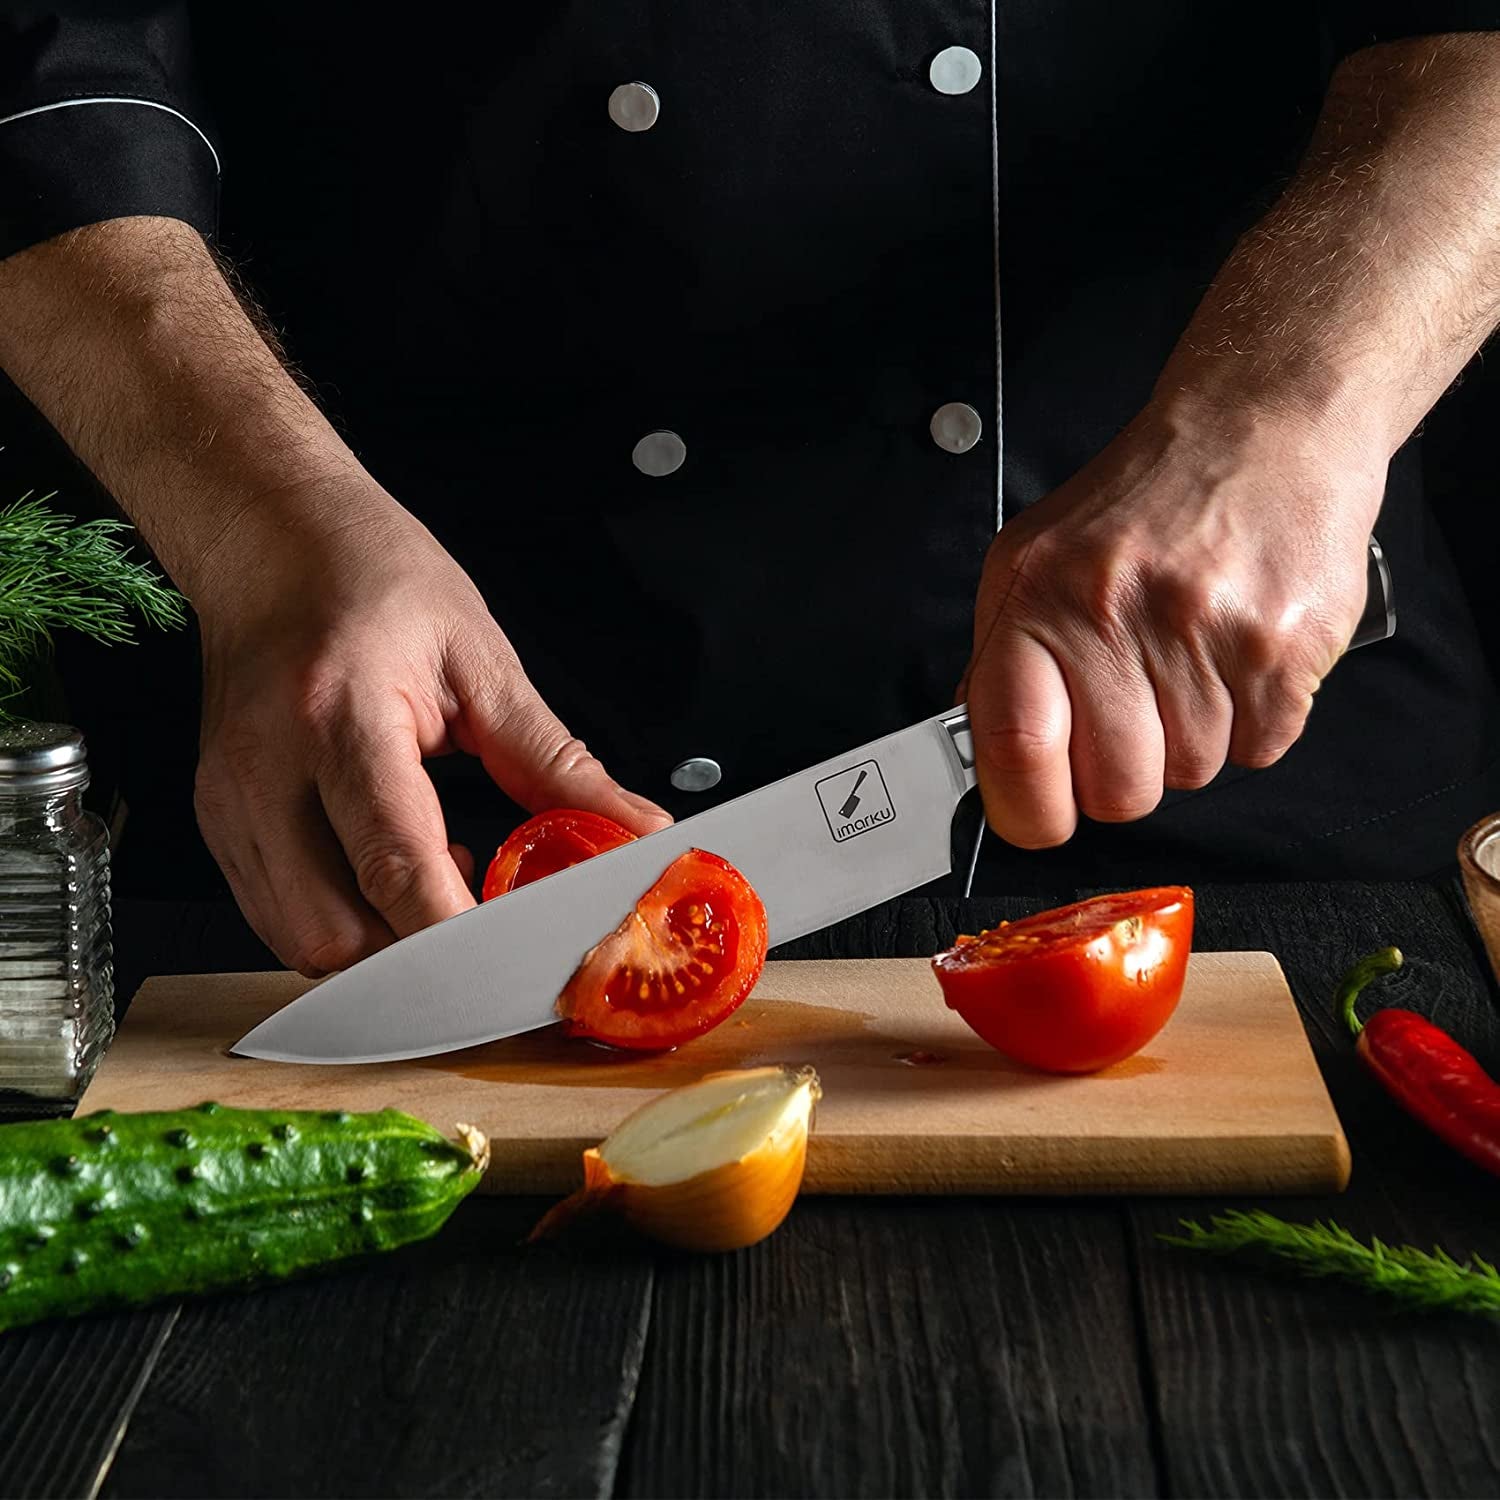 Japanese Chef Knife - Pro Kitchen Knife 8 Inch Chef'S Knives High Carbon Stainless Steel Sharp Paring Knife with Ergonomic Handle, Useful Kitchen Gadgets 2023